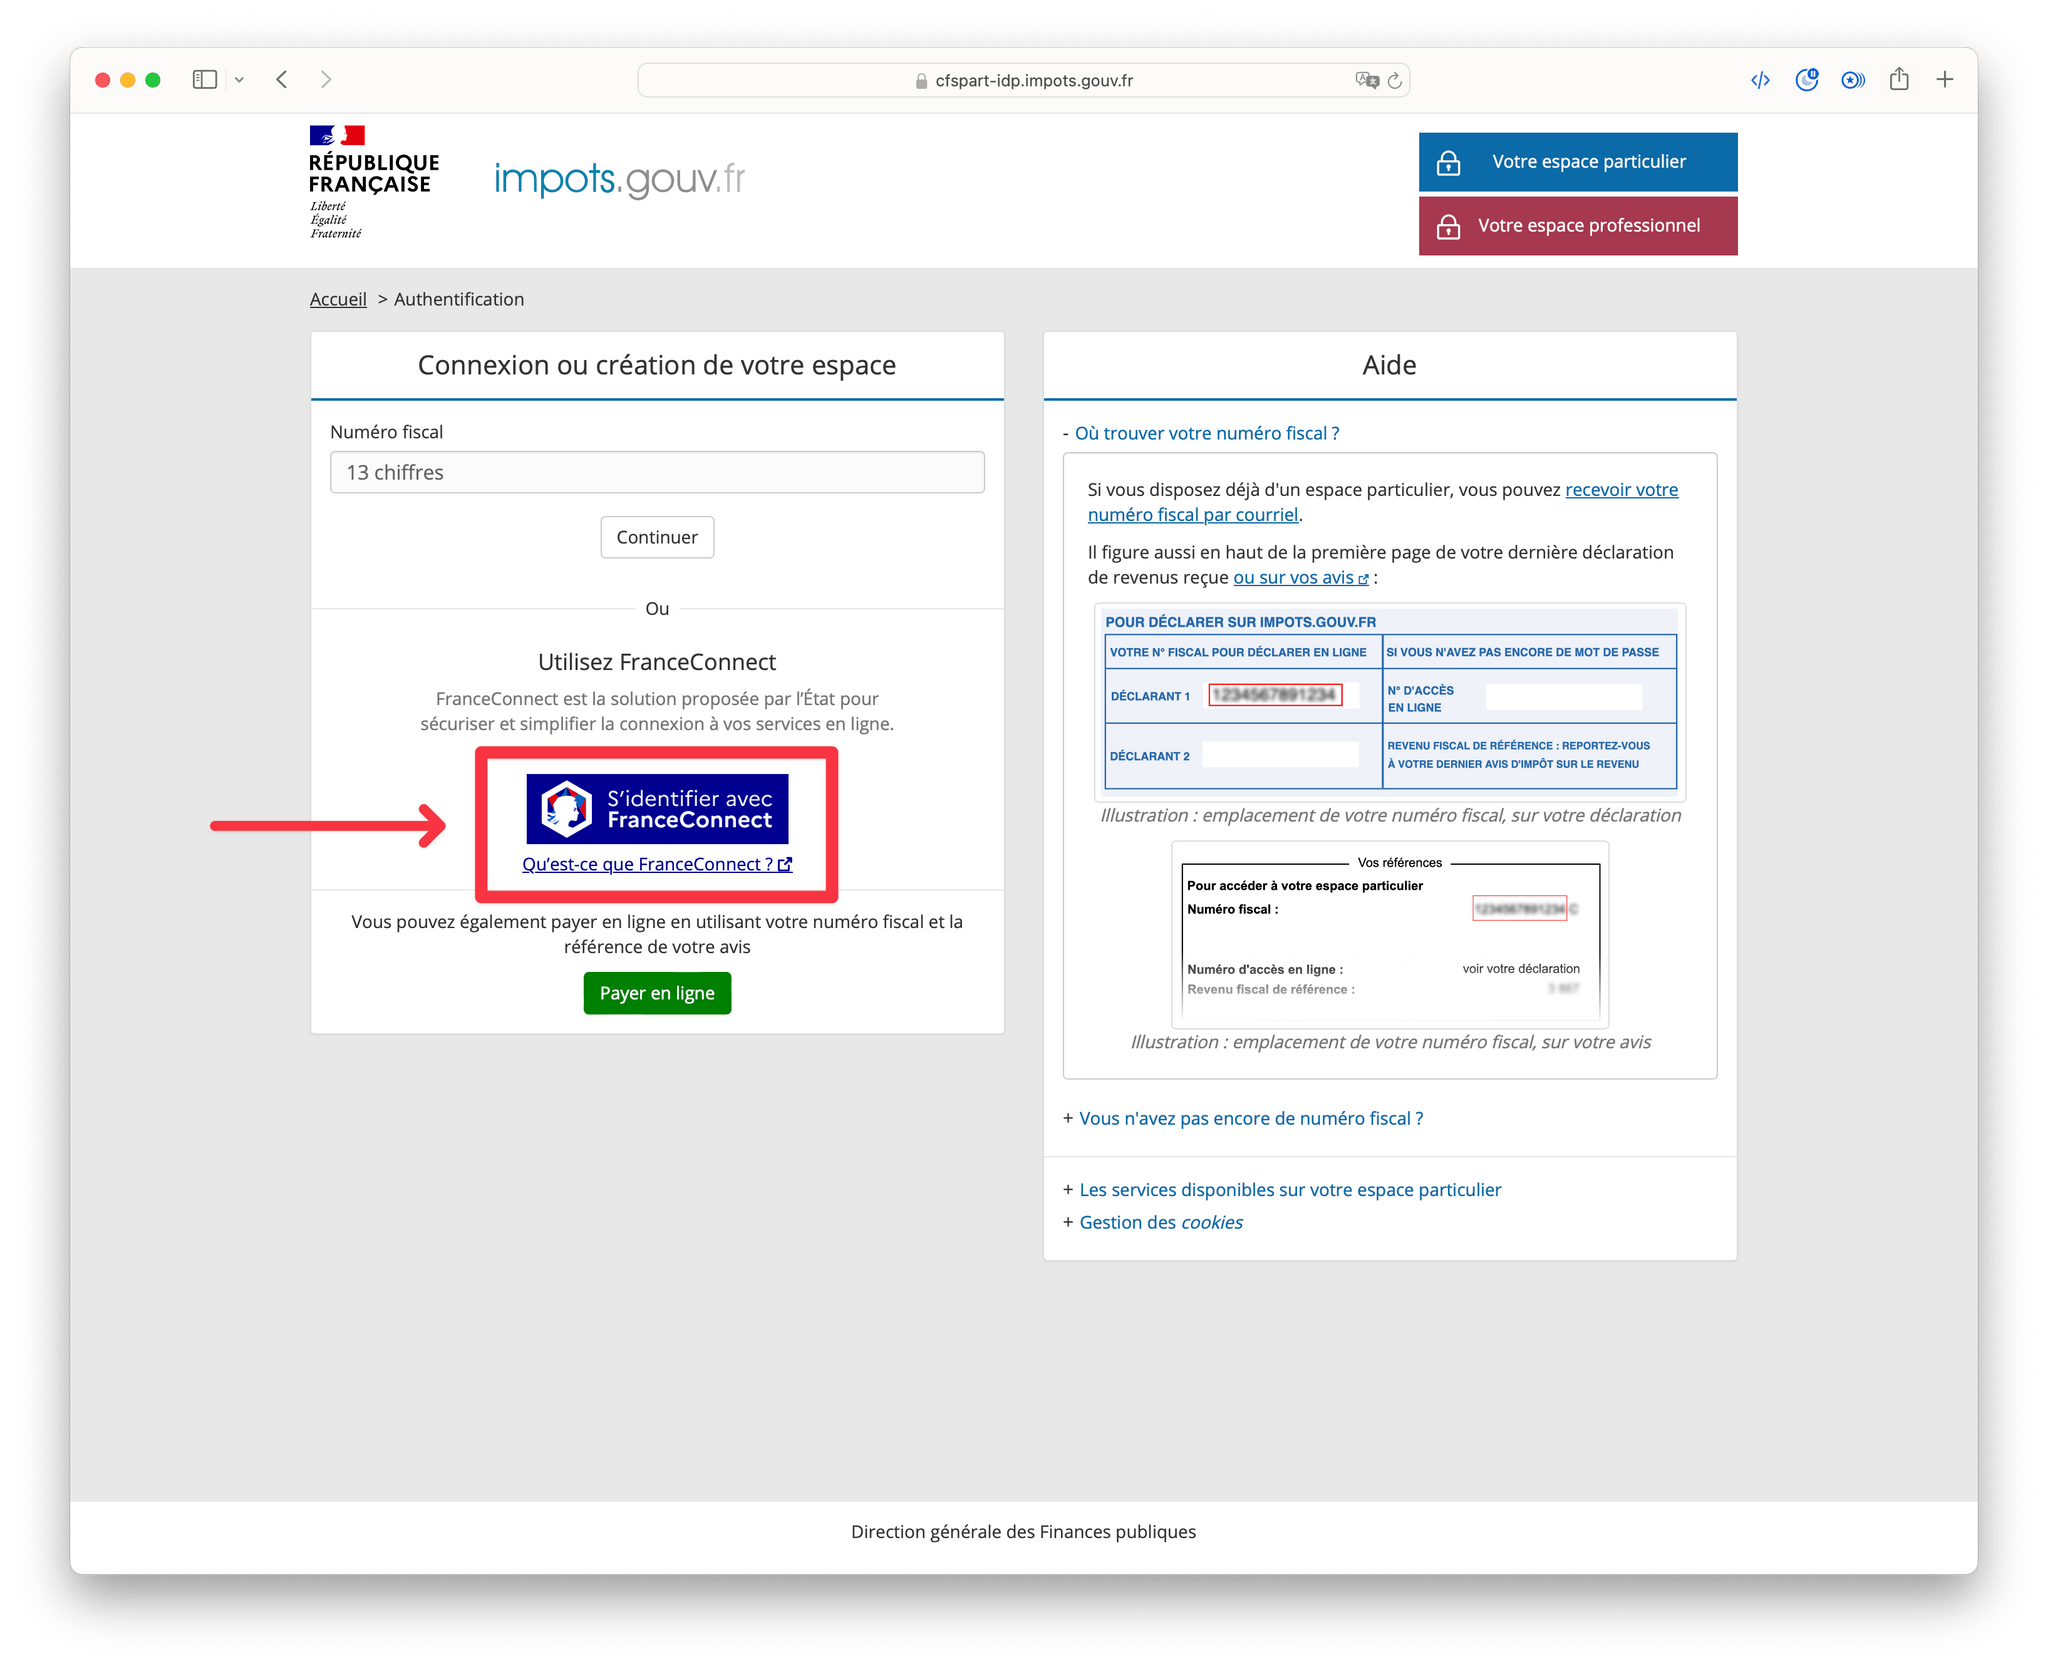 French ID card holders can log in to almost any French online public service using their digital ID by clicking the 'Sign in with FranceConnect' button.